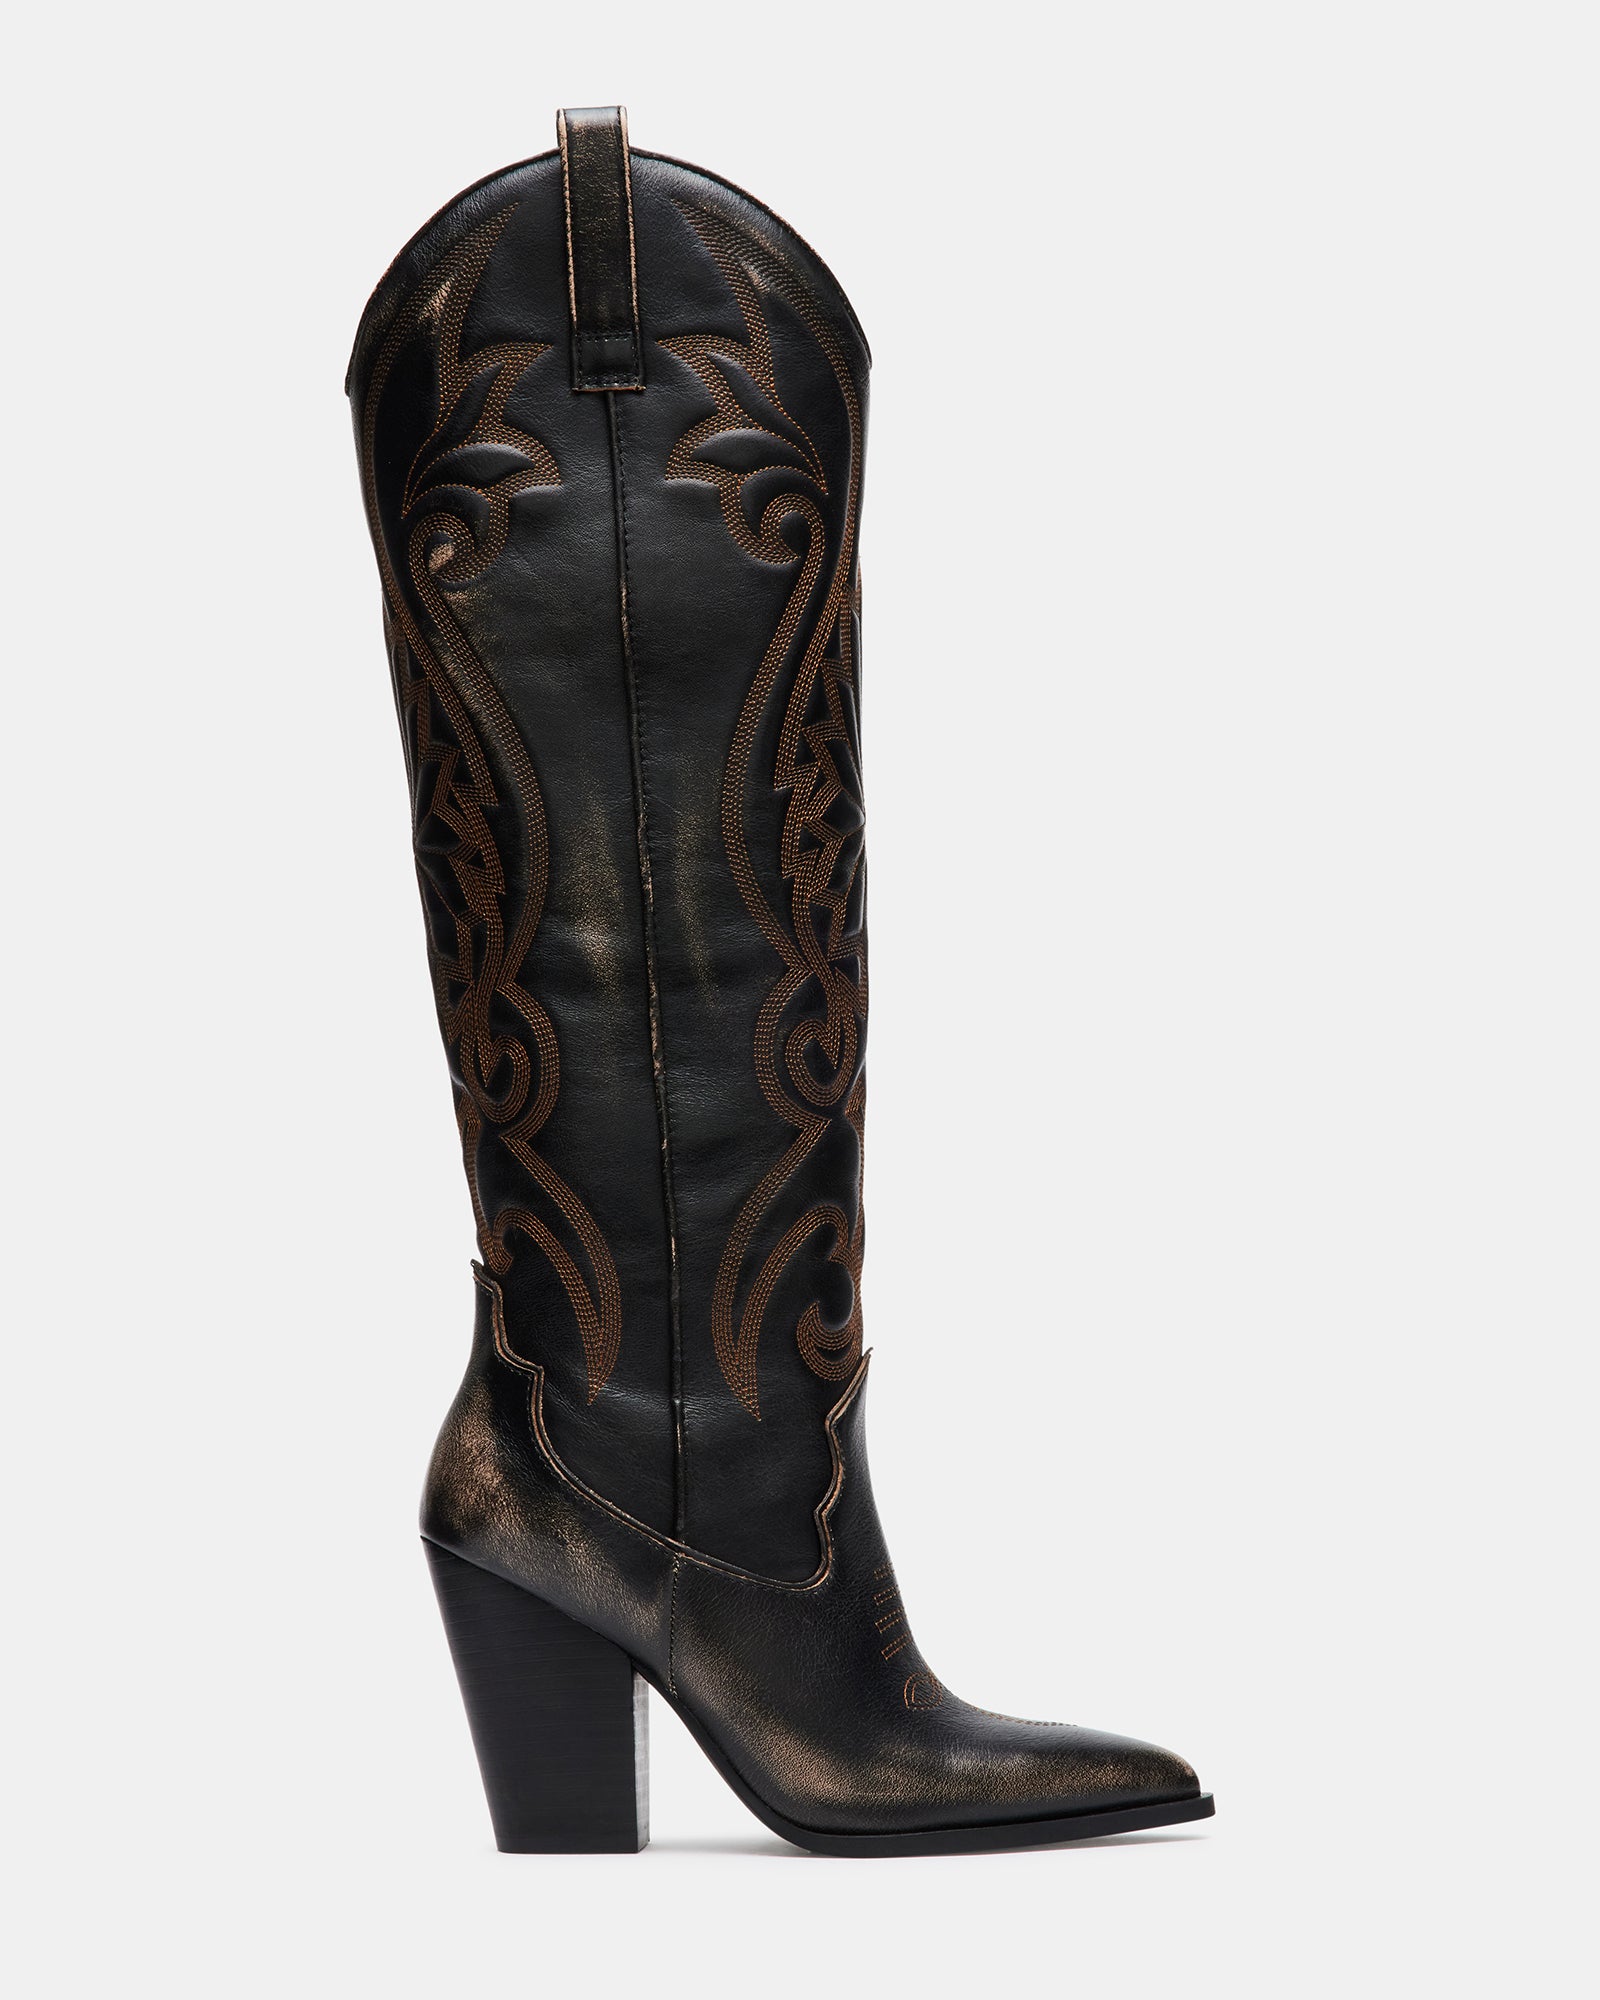 COWGIRL BOOTS – Steve Madden